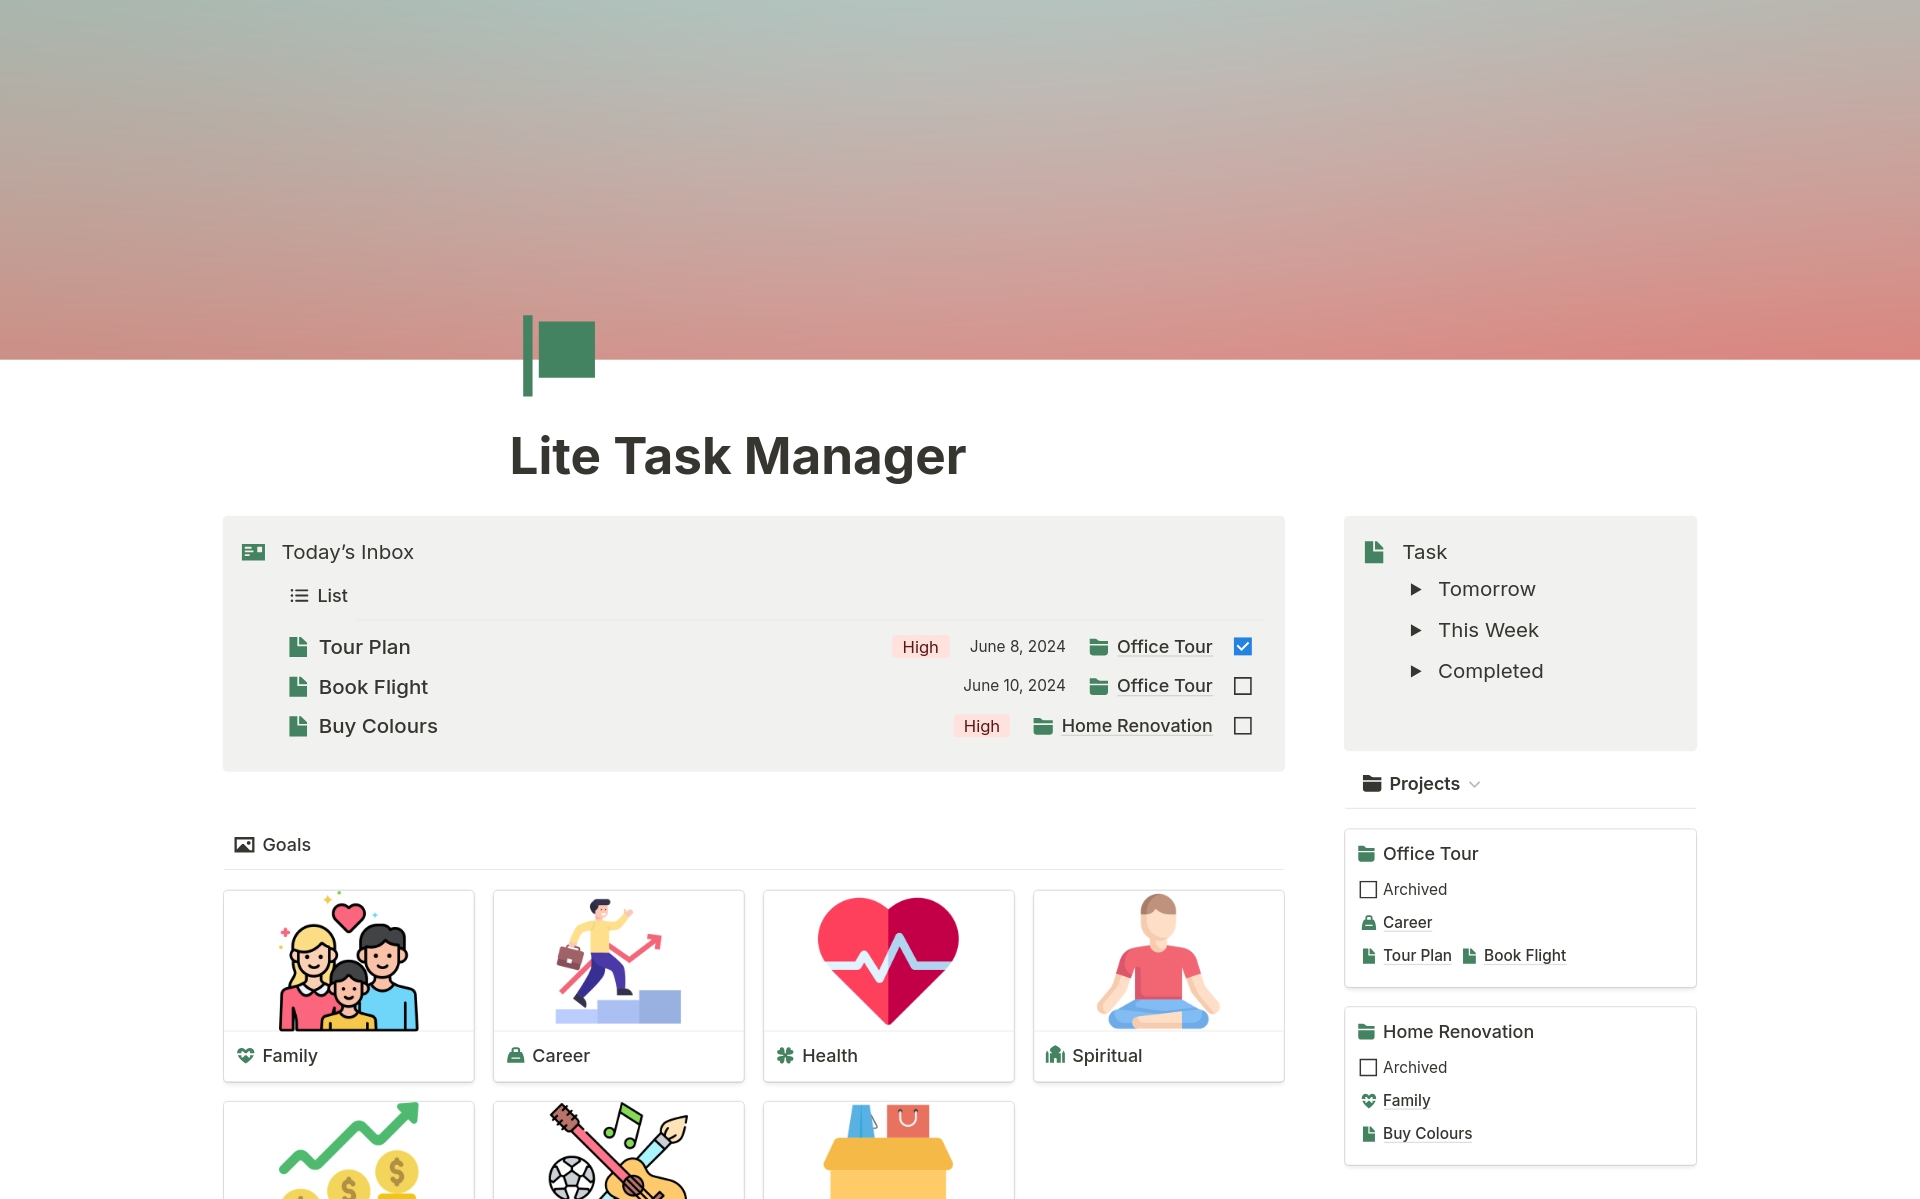 Introducing the "Lite Task Manager" Notion Template! 💼

Boost your productivity and stay organized with our easy-to-use template. Key features include:

🔹 Simple Dashboard View: See tasks and priorities at a glance.

🔹 Weekly and Monthly View: Plan your schedule and set goal